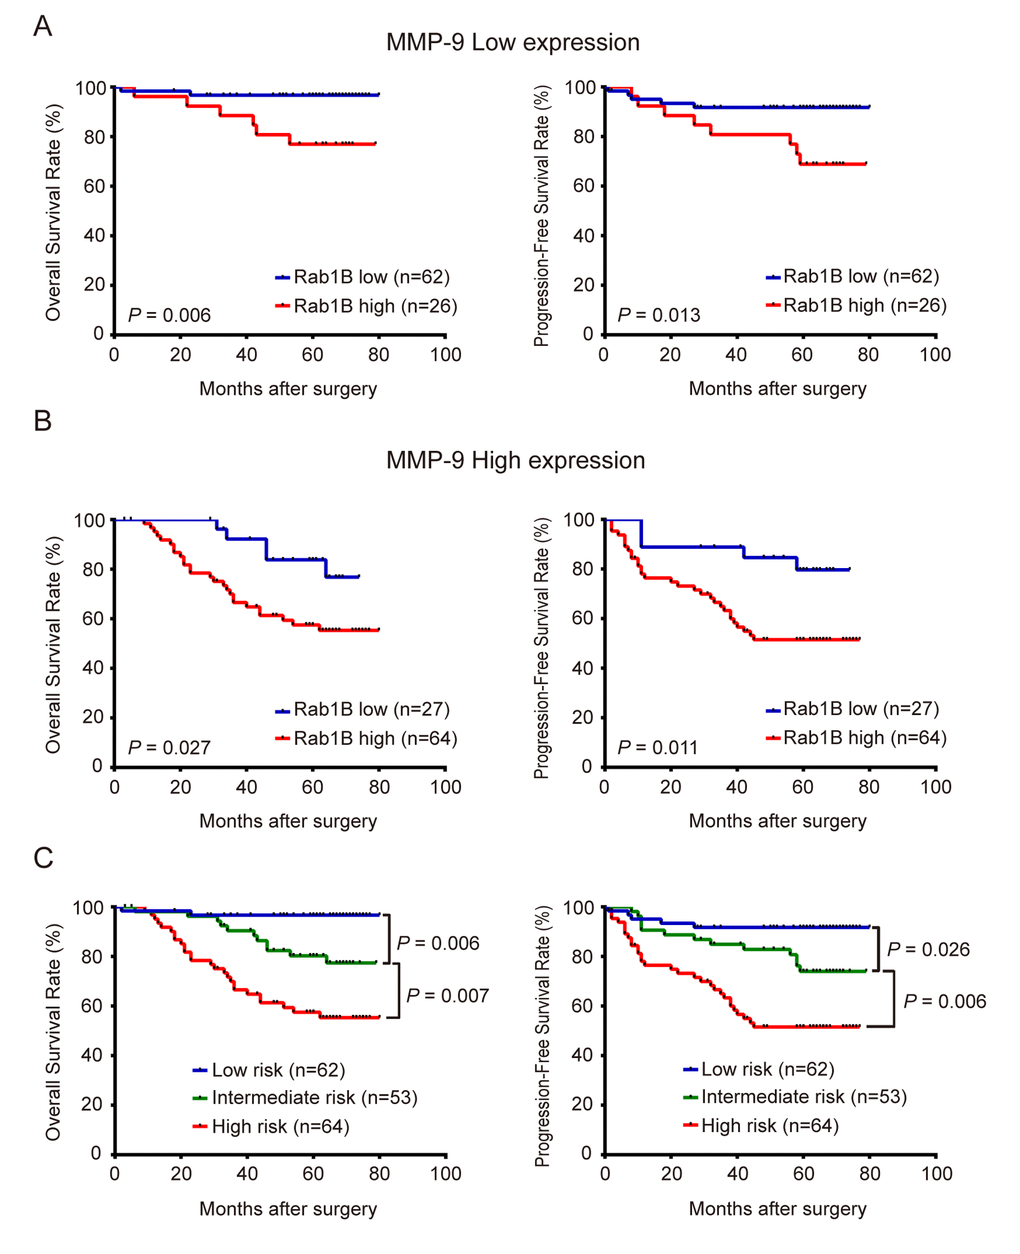 Combined overexpression of Rab1B/MMP9 further improves predictive efficiency for outcome of CRC patients. (A) OS and PFS of patients with high or low Rab1B expression in those with low-expression of MMP9. (B) OS and PFS of patients with high or low Rab1B expression in those with high-expression of MMP9. (C) OS and PFS of patients who were stratified into three risk groups by the combined risk score of Rab1B and MMP9 proteins. Kaplan-Meier survival was used to predict the outcomes of CRC patients with low, intermediate or high combined risk score.